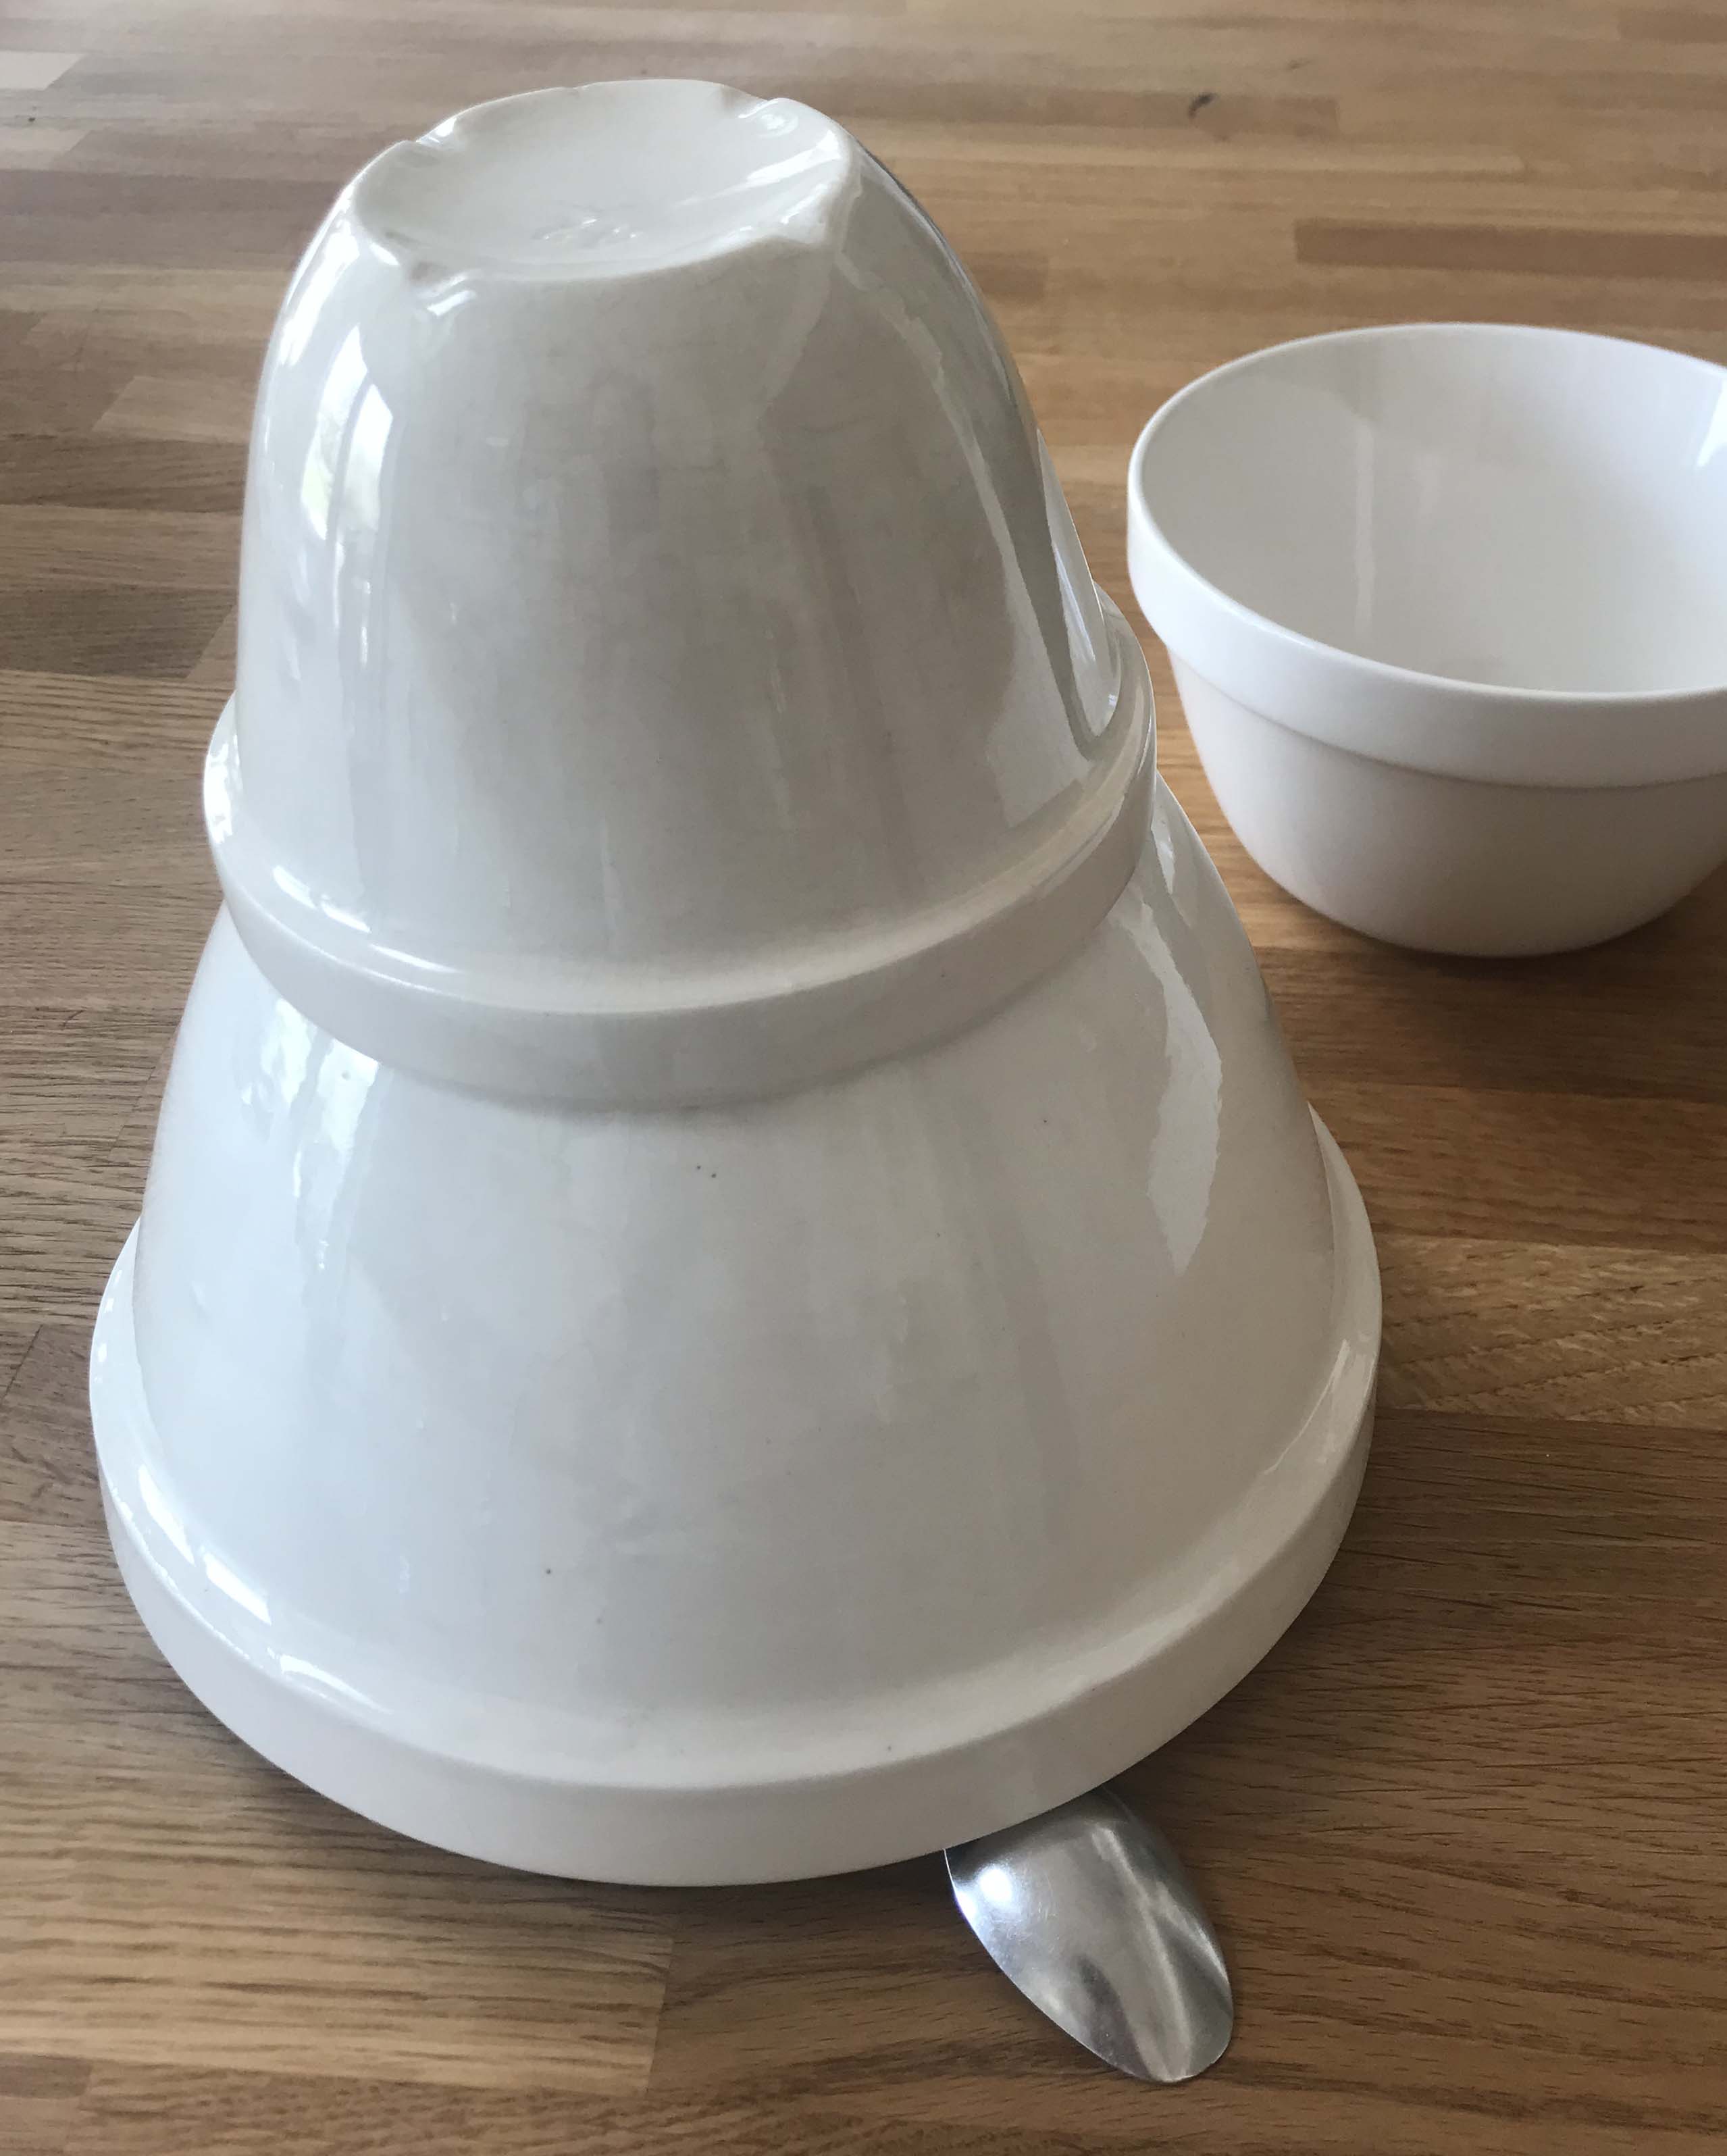 Small upturned bowl on top of larger upturned bowl with one edge raised and sitting on a spoon on a kitchen worksurface